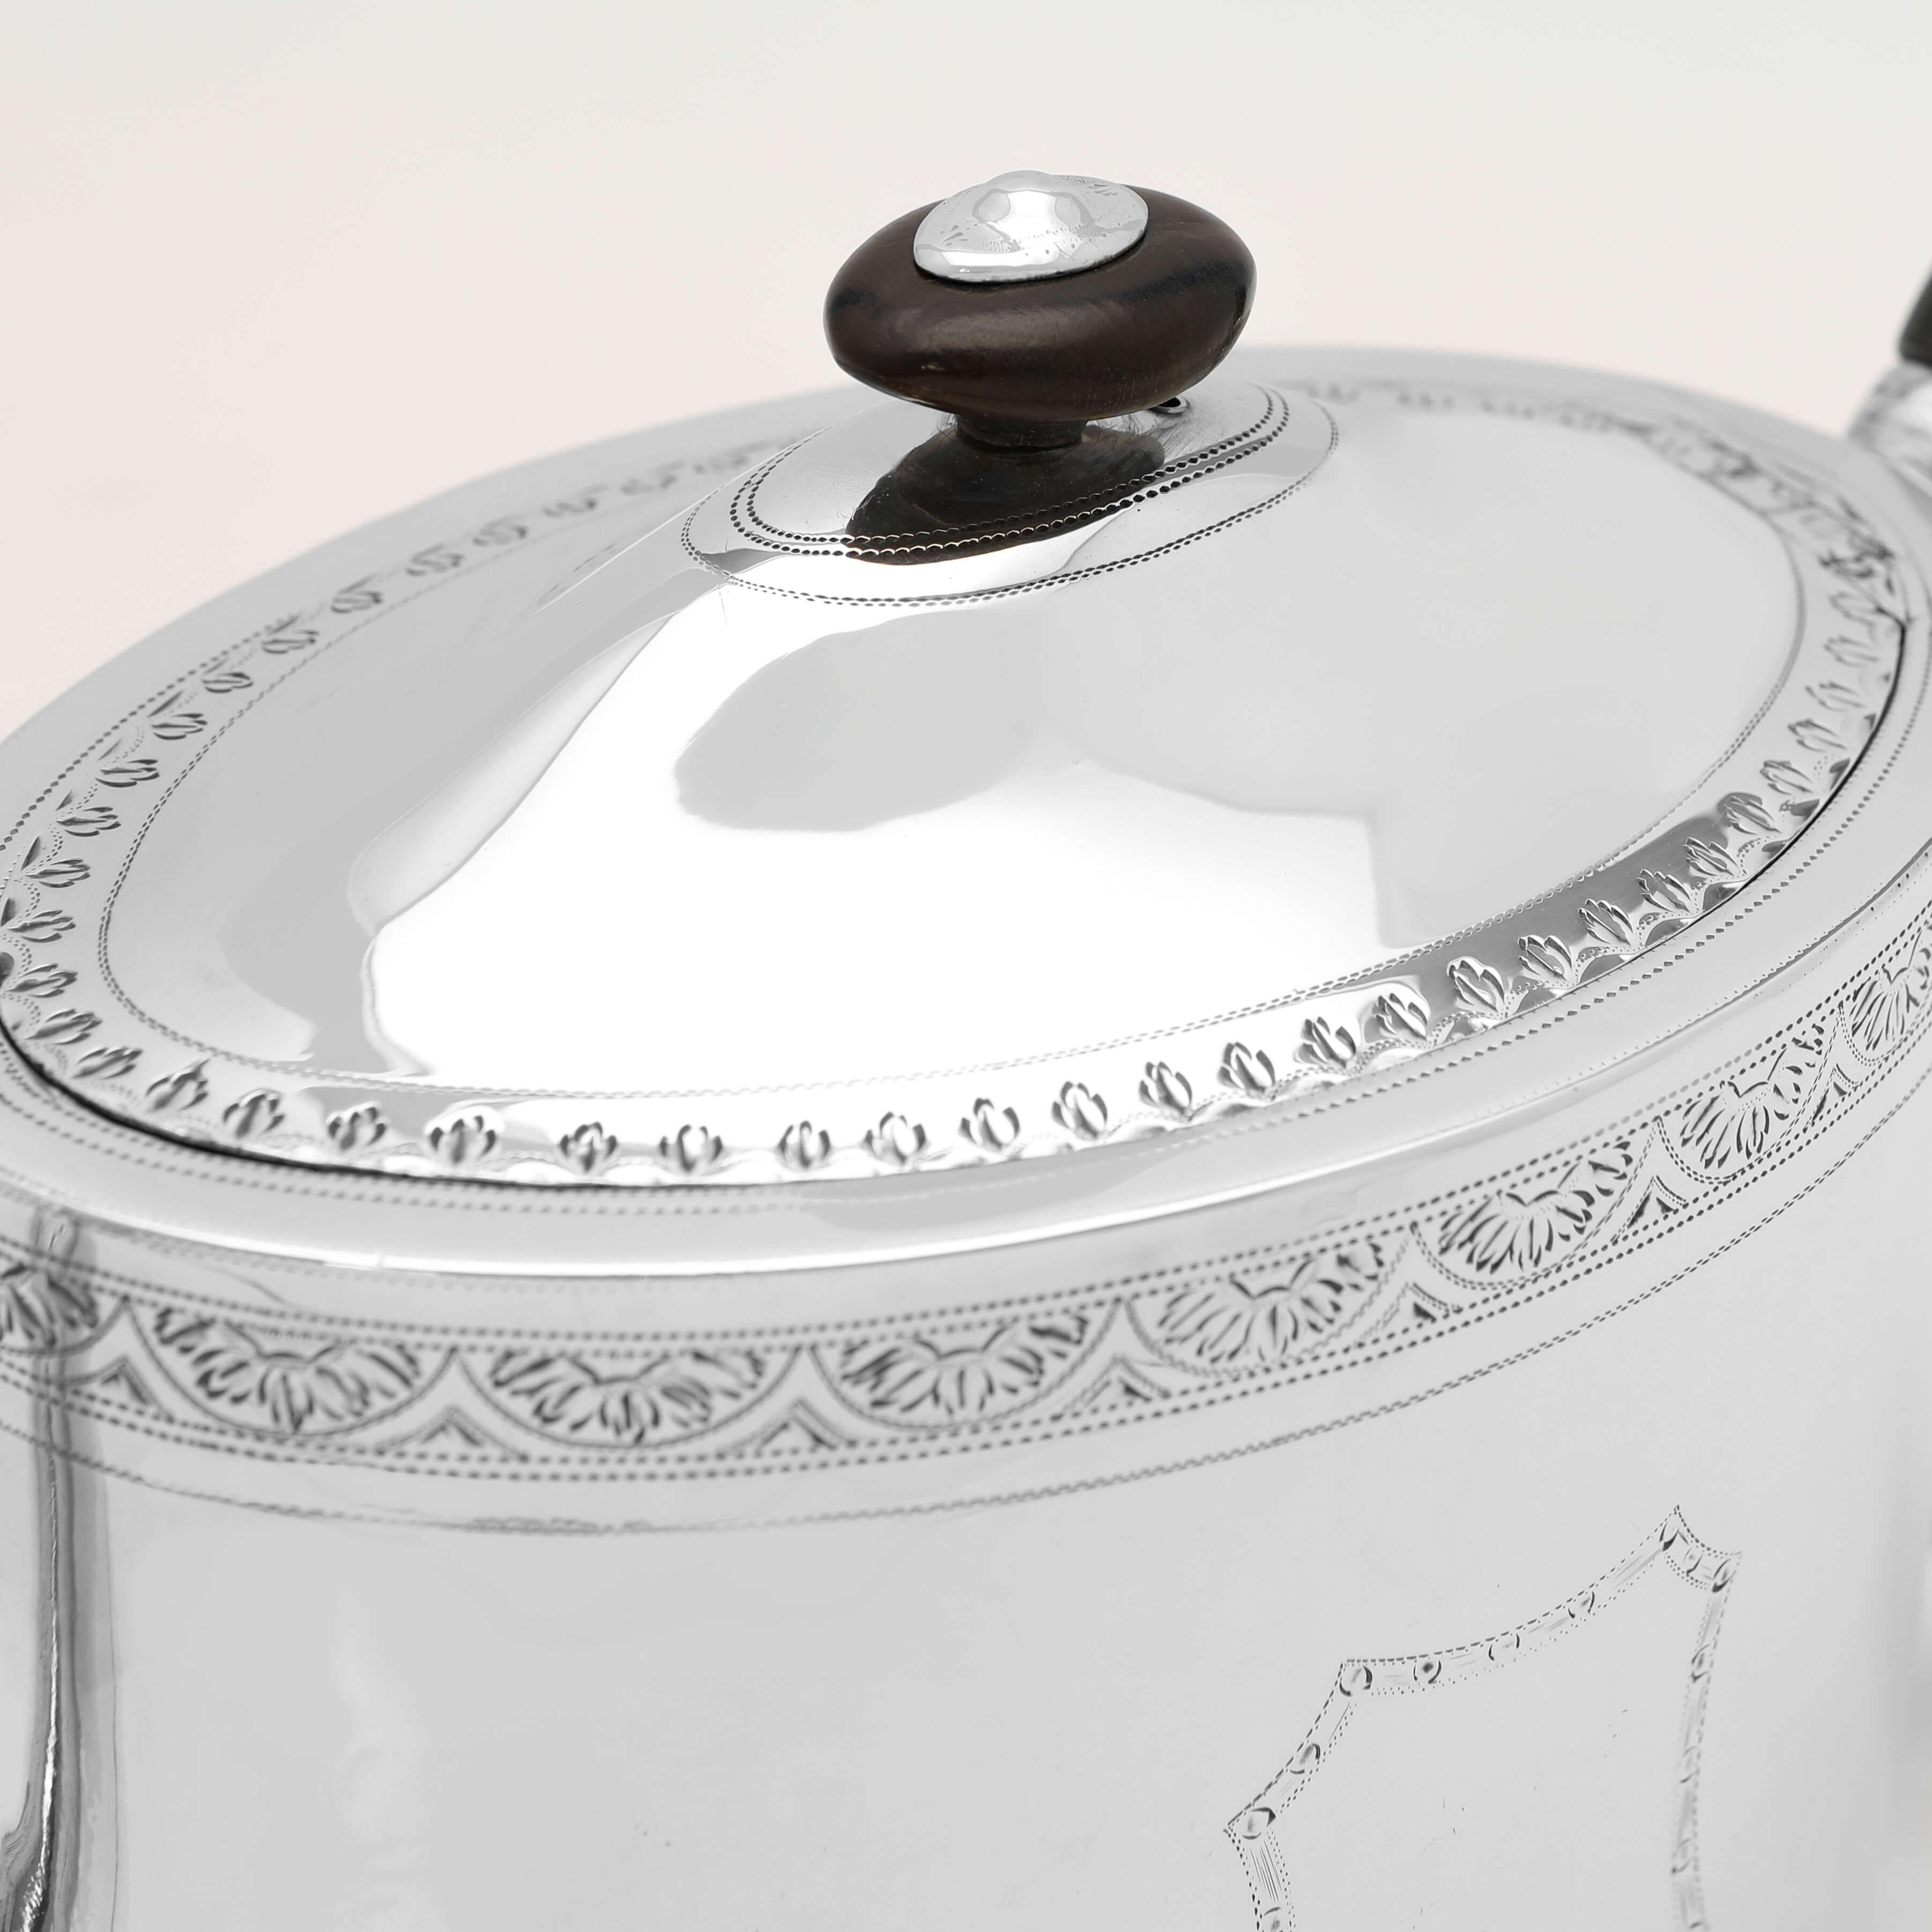 Neoclassical Sterling Silver Teapot & Stand - Hallmarked in 1793 - Henry Chawner In Good Condition For Sale In London, London